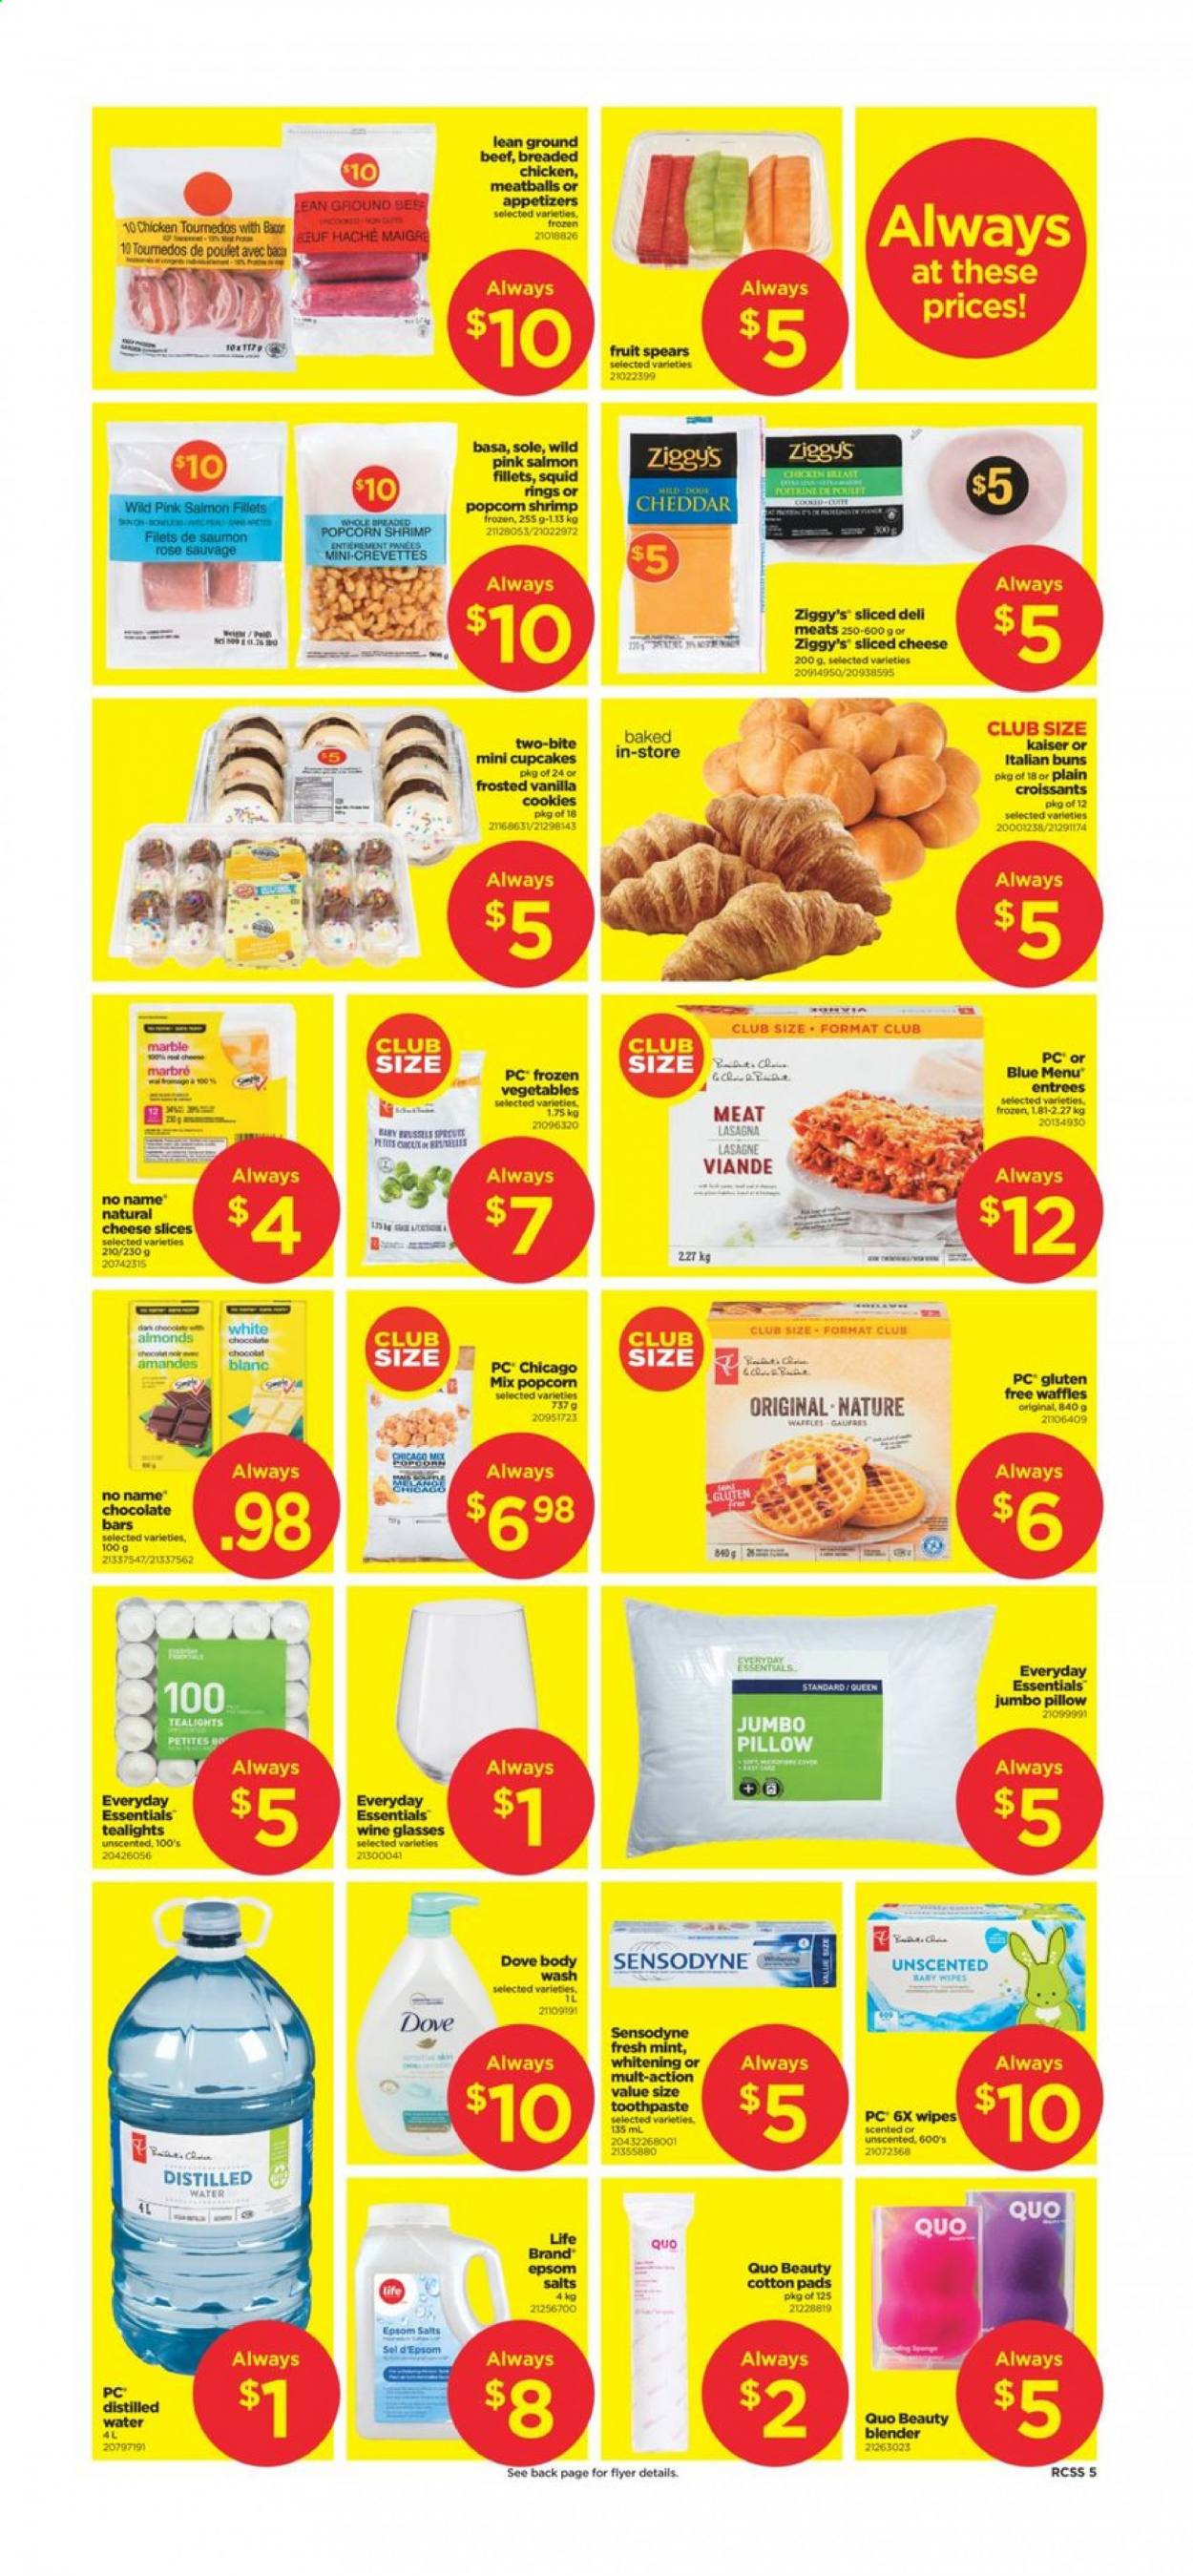 thumbnail - Real Canadian Superstore Flyer - July 08, 2021 - July 14, 2021 - Sales products - croissant, buns, cupcake, waffles, salmon, salmon fillet, squid, shrimps, No Name, meatballs, lasagna meal, sliced cheese, cheddar, cheese, frozen vegetables, cookies, white chocolate, chocolate bar, almonds, wine, rosé wine, beef meat, ground beef, wipes, body wash, toothpaste, wine glass, pillow, Sensodyne. Page 5.